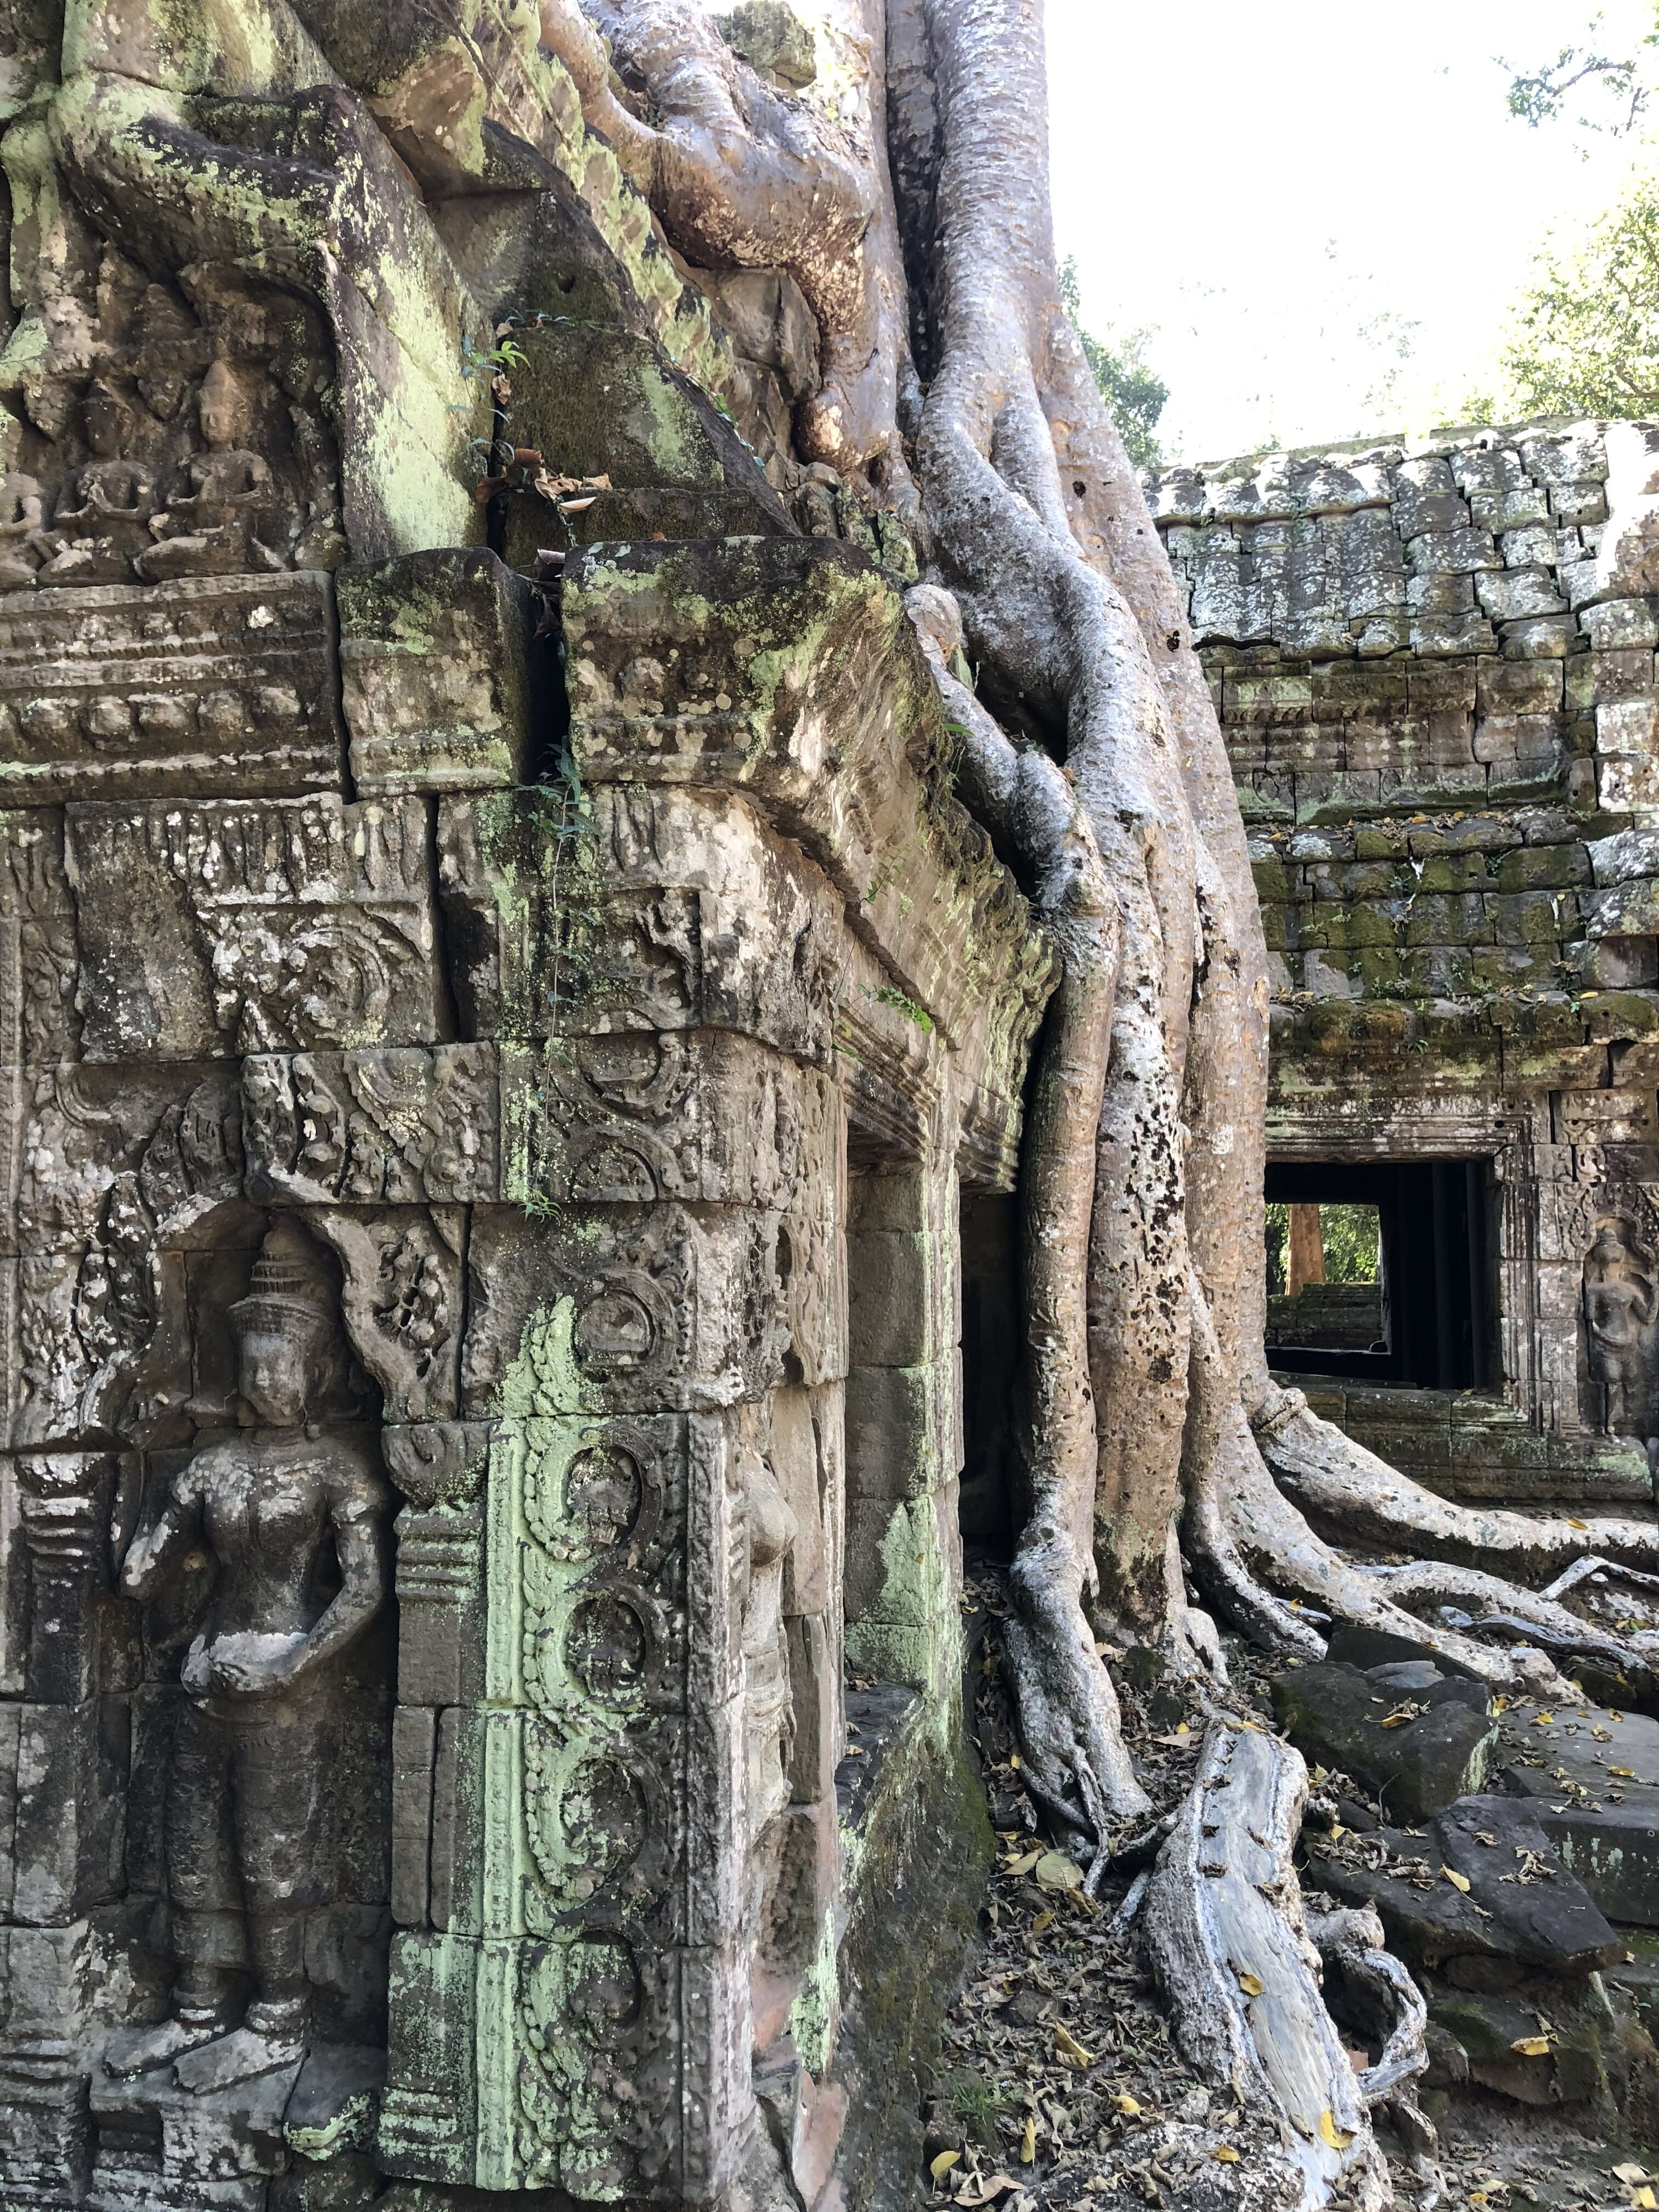 One of the temples in Siem Reap